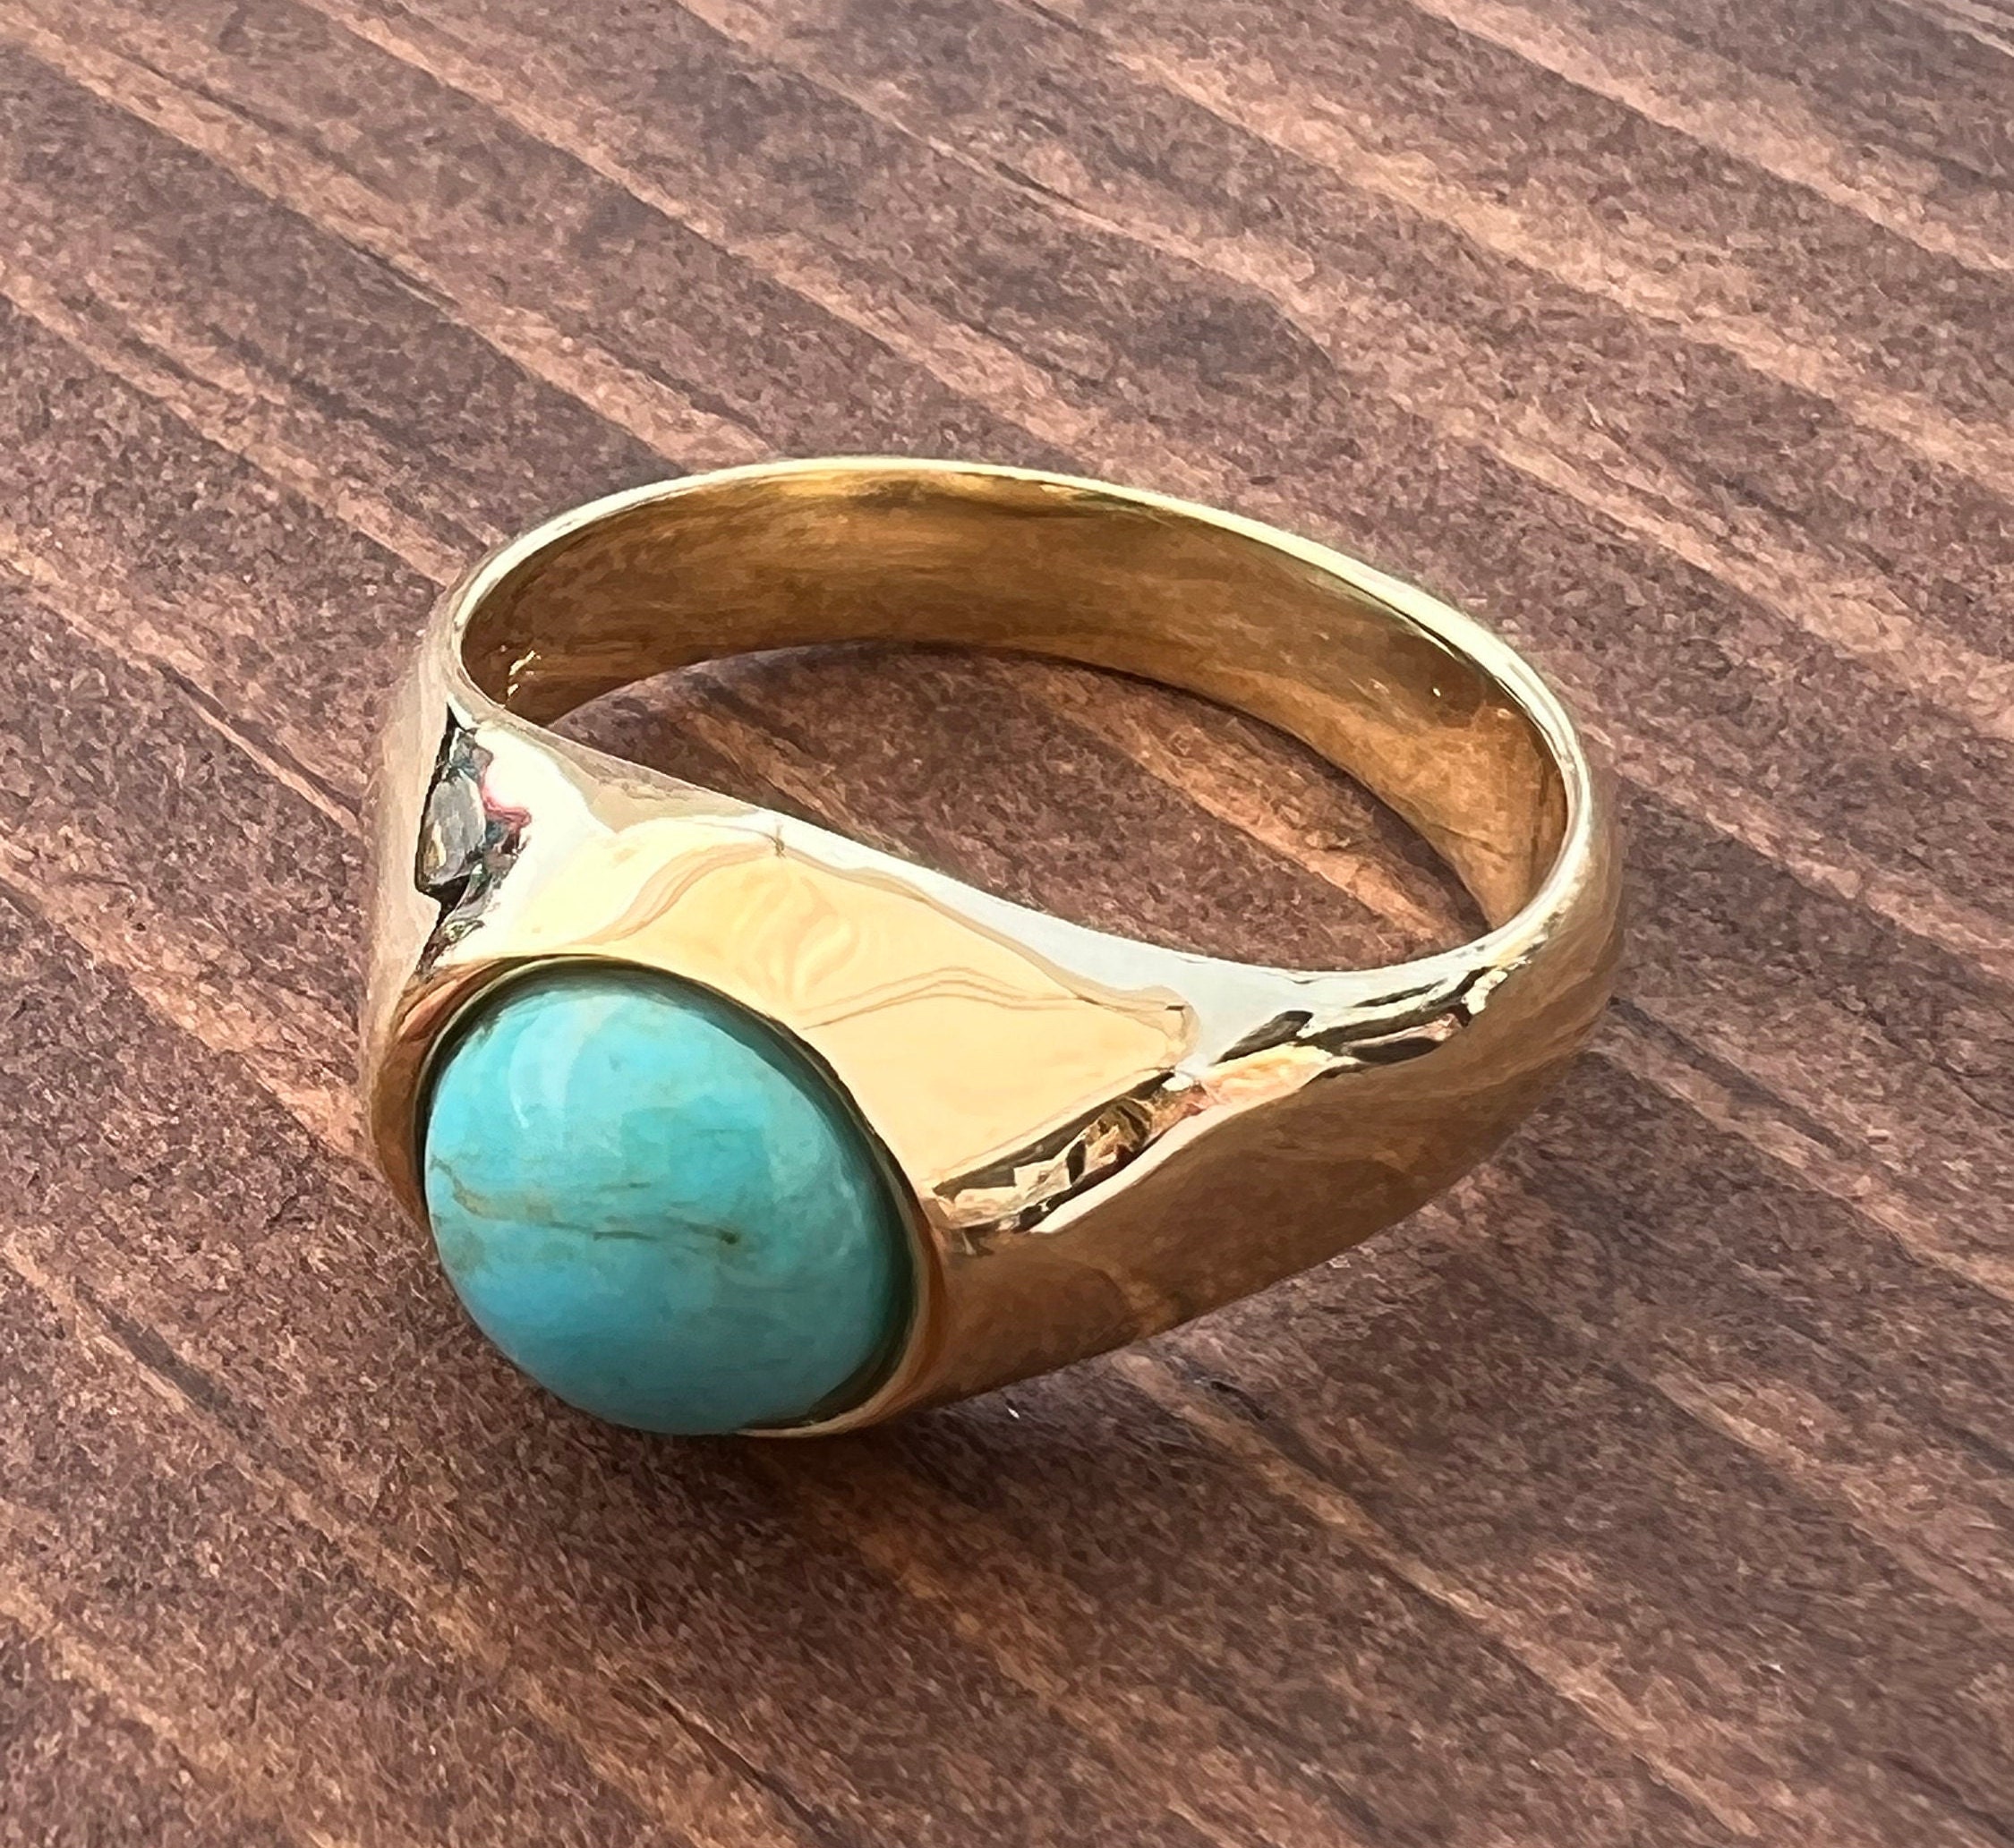 Buy Blue Turquoise Ring Online In India - Etsy India